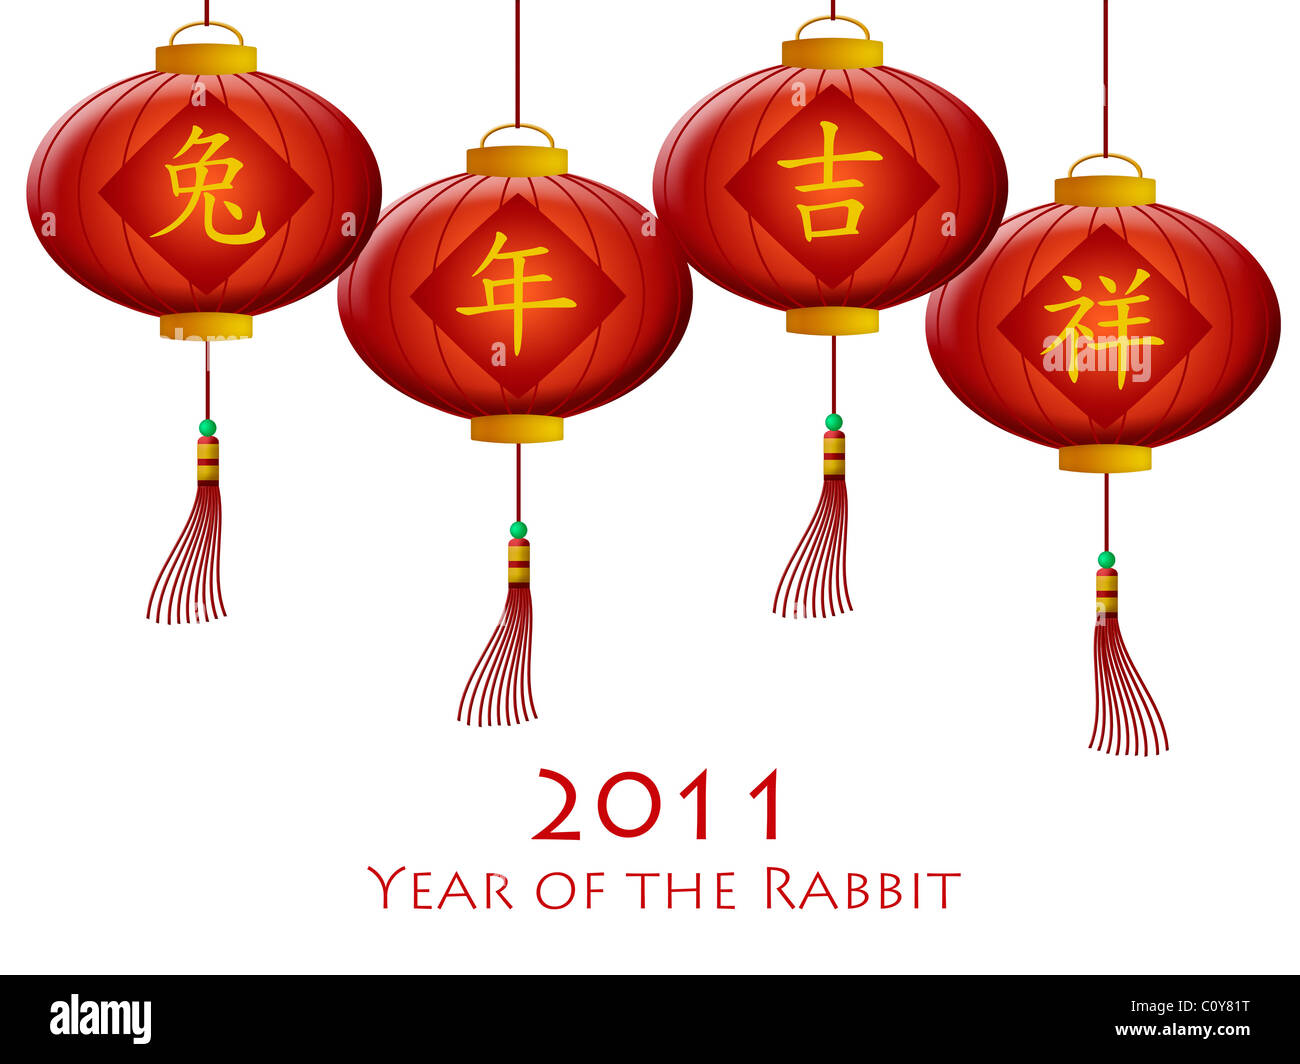 Happy Chinese New Year 2011 Rabbit with Red Lanterns Illustration Stock Photo